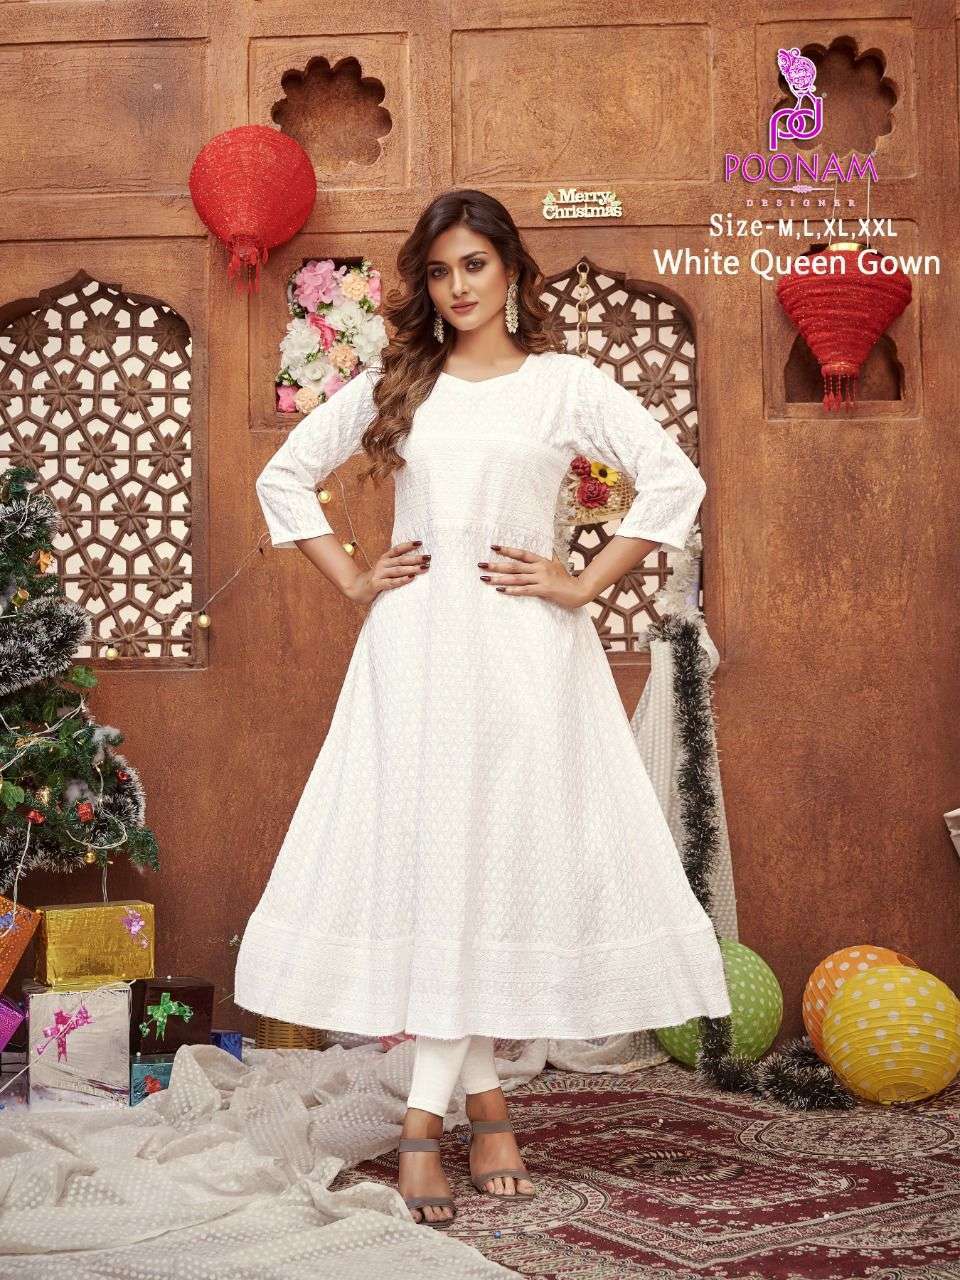 poonam designer white queen gown series 1001-1006 rayon gown 